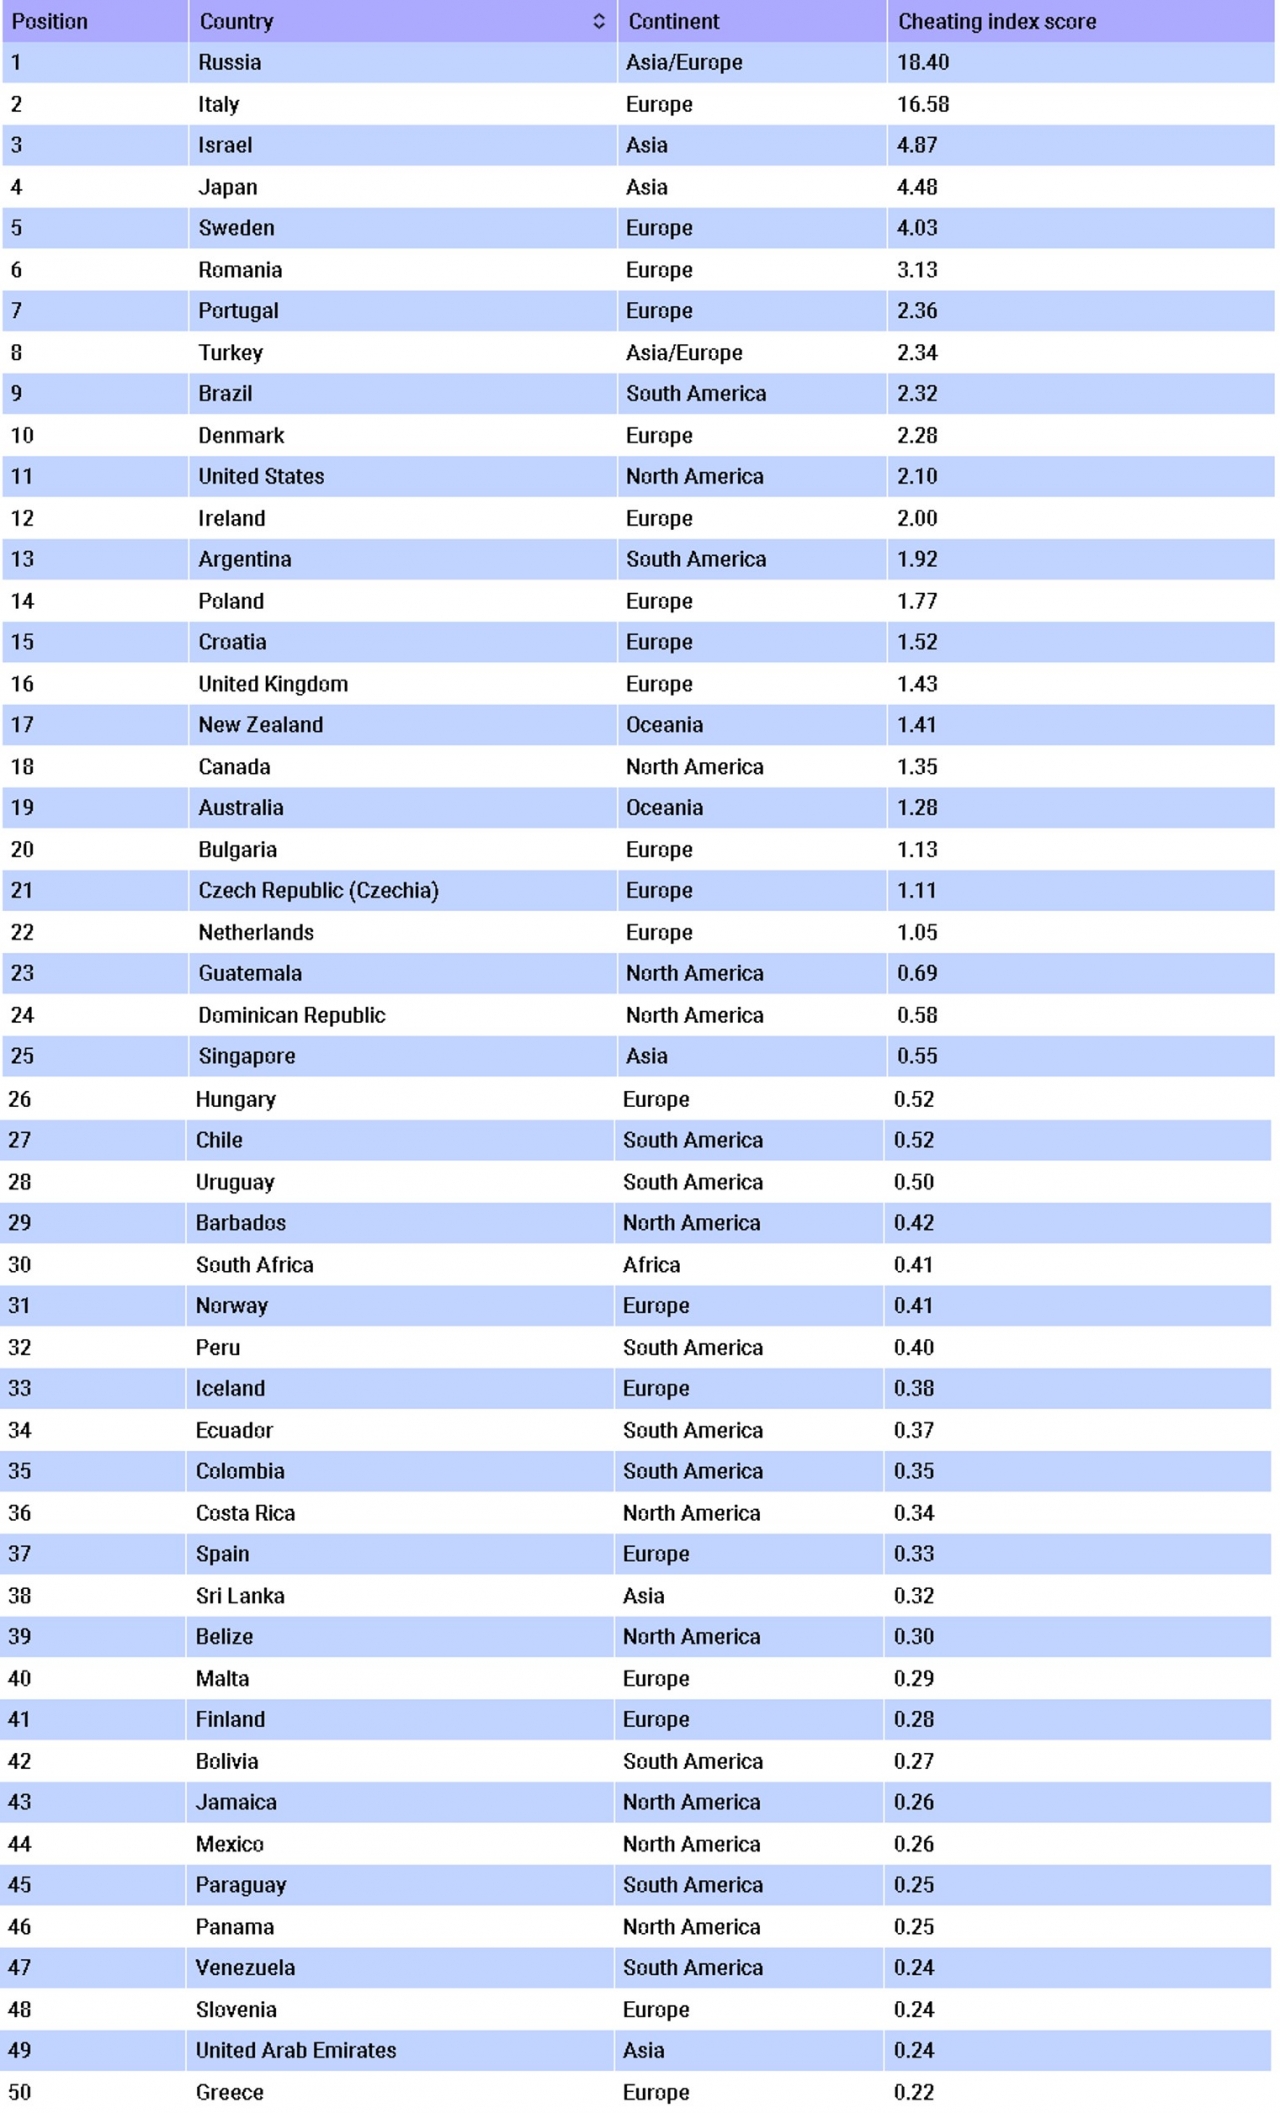 Cheat Usage Rates By Country, Who Is The Most Cheating Country?